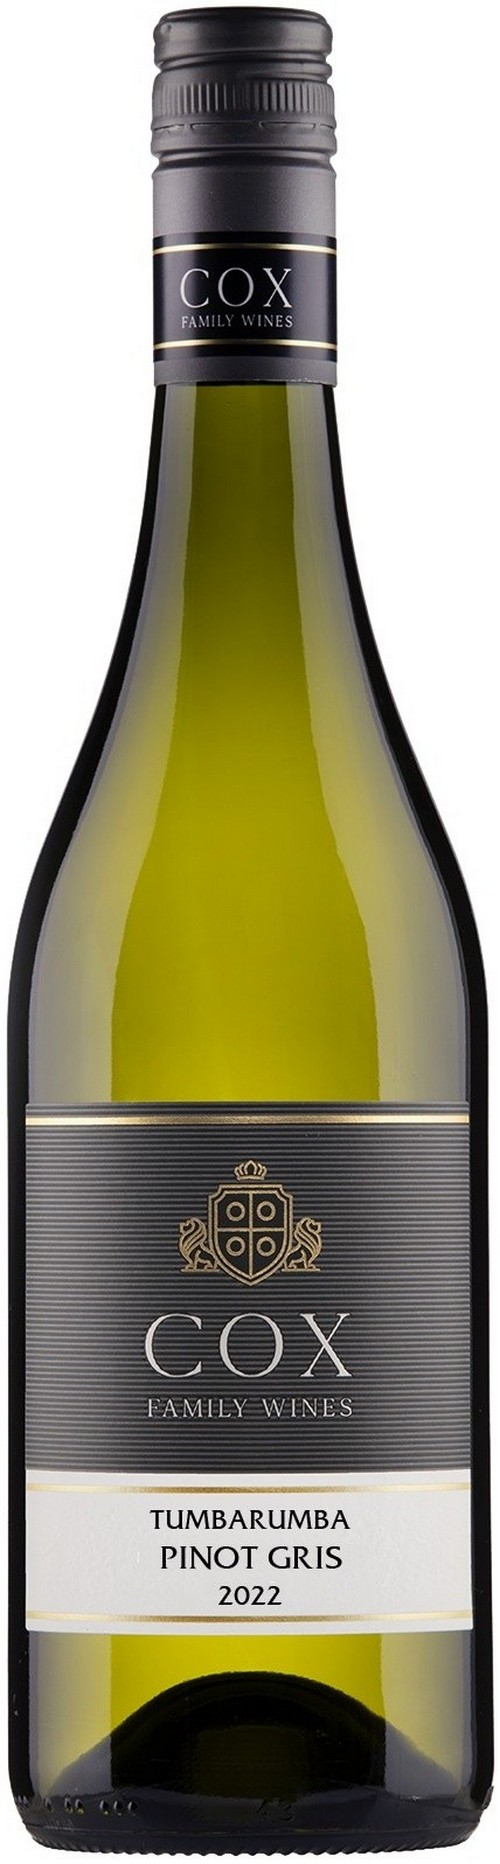 cox-family-wines-pinot-gris-2022